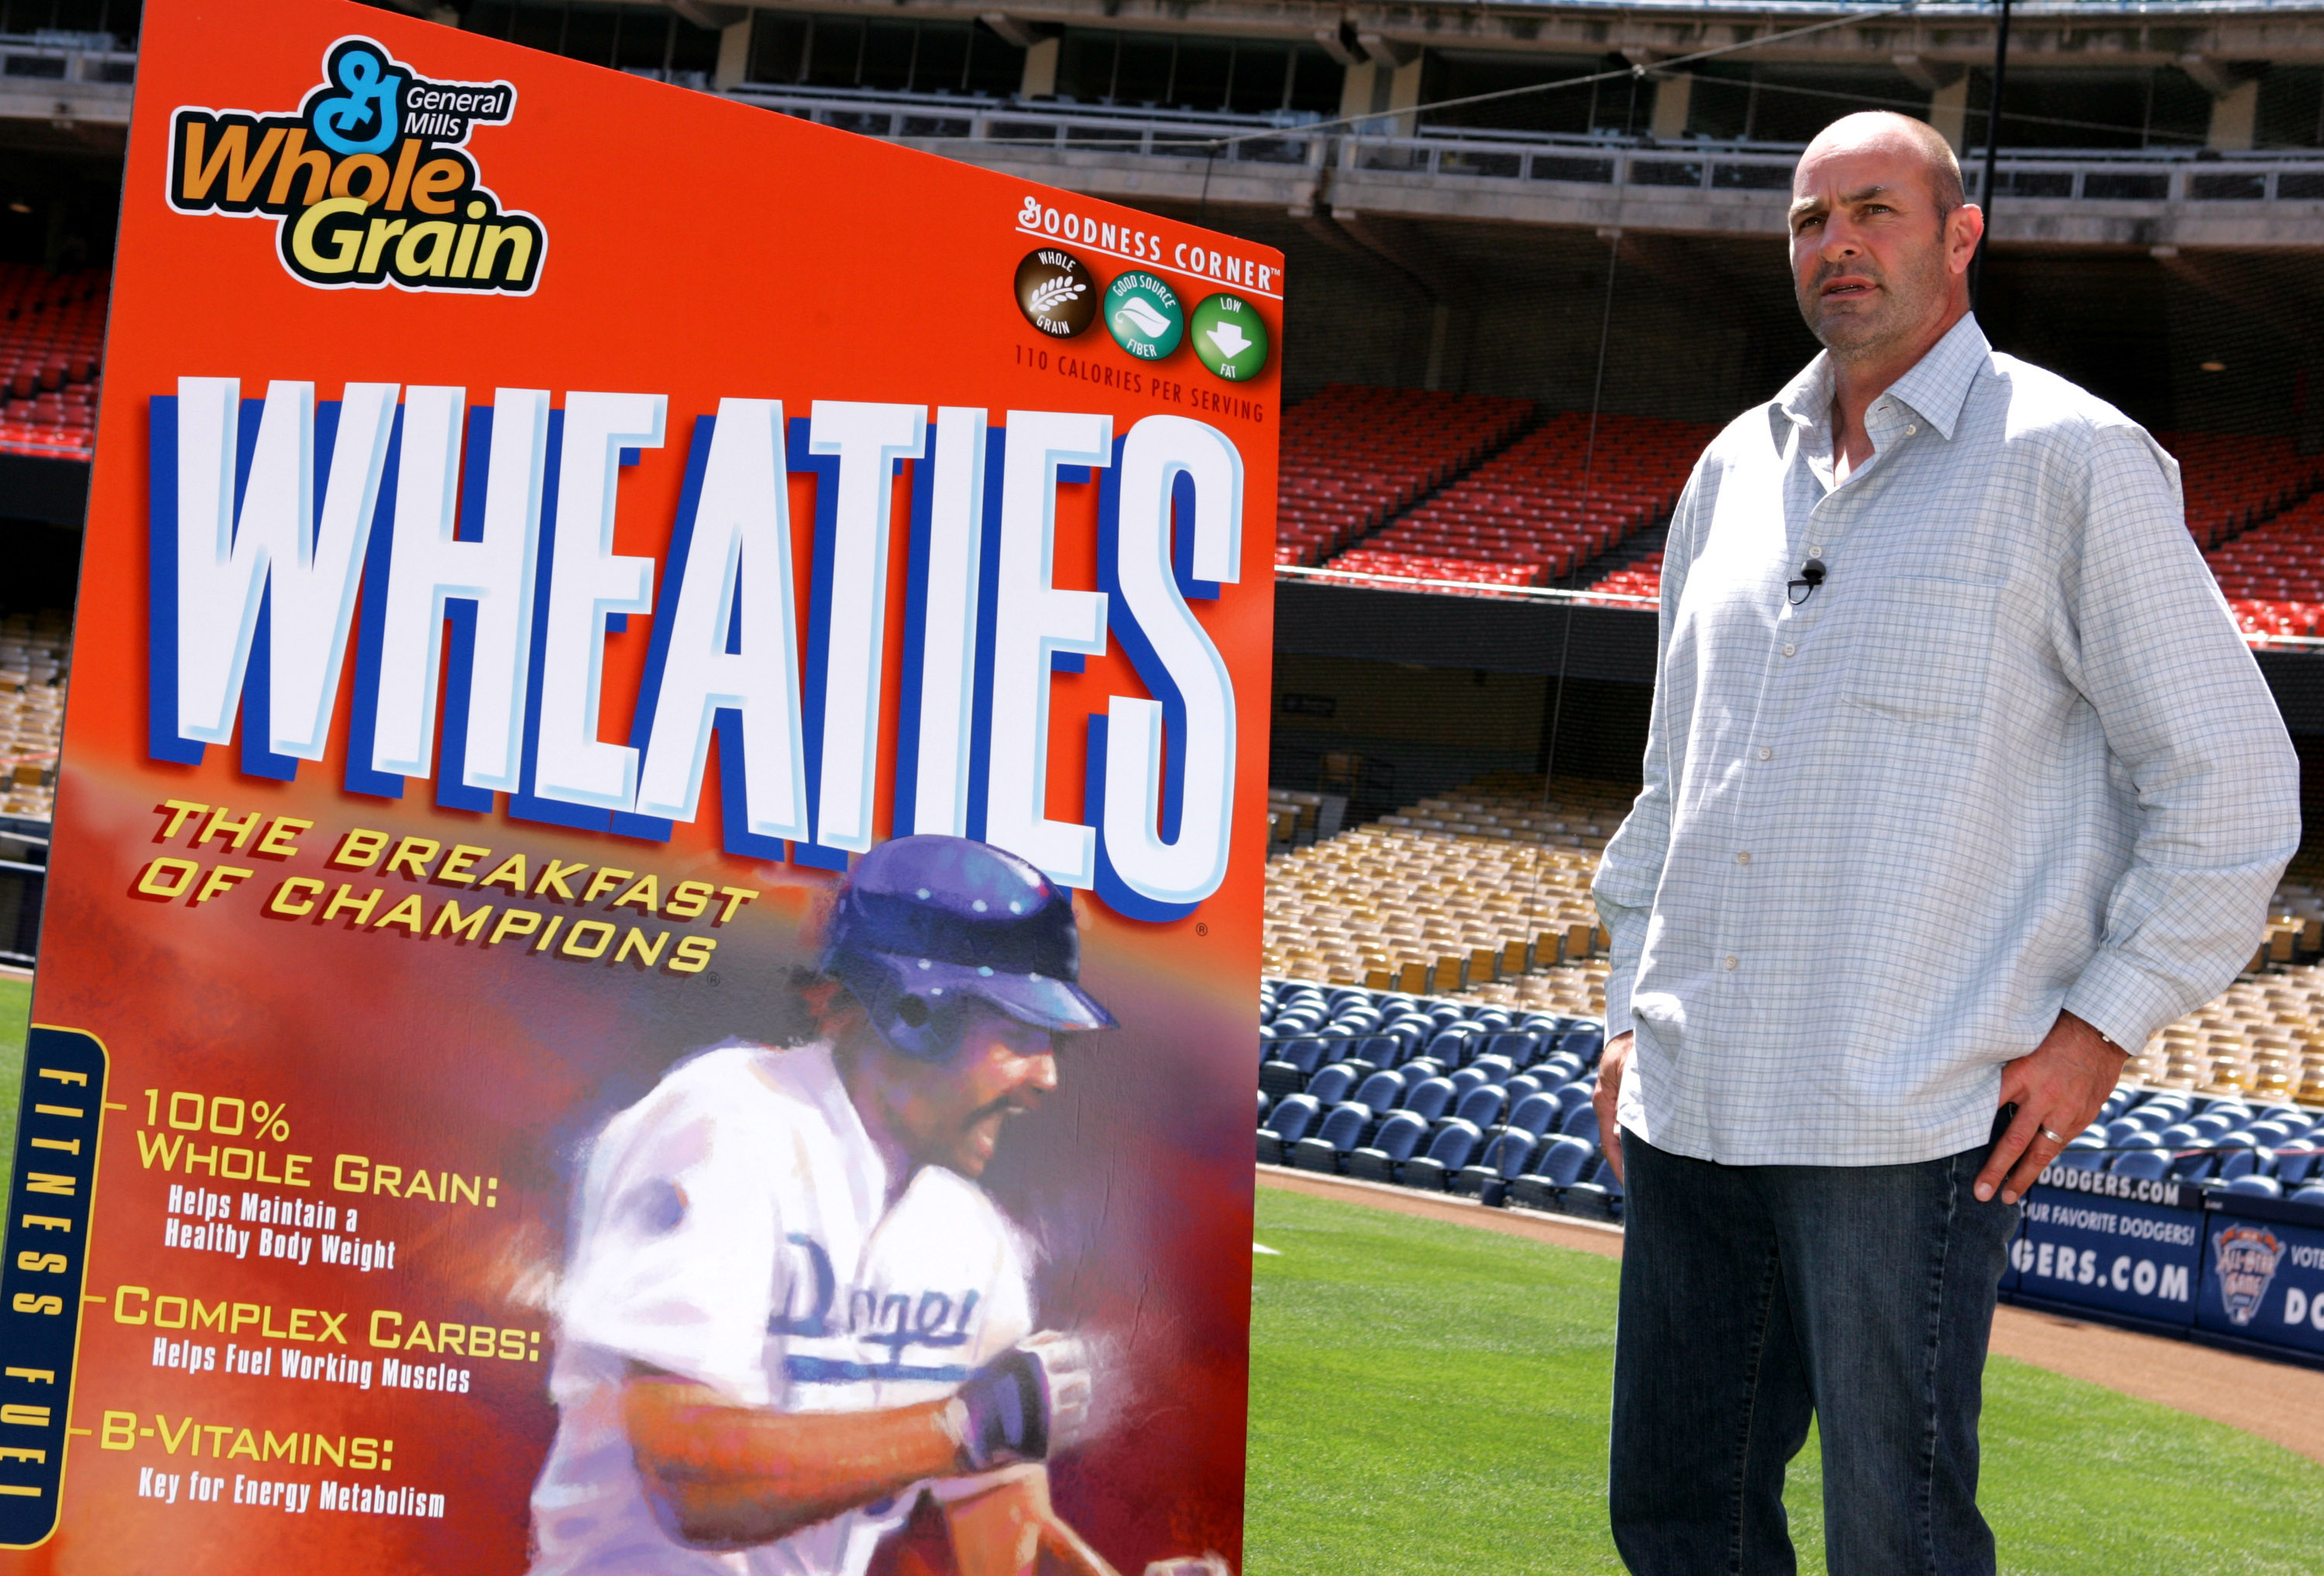 Wheaties Unveils New Cereal Box featuring Kirk Gibson